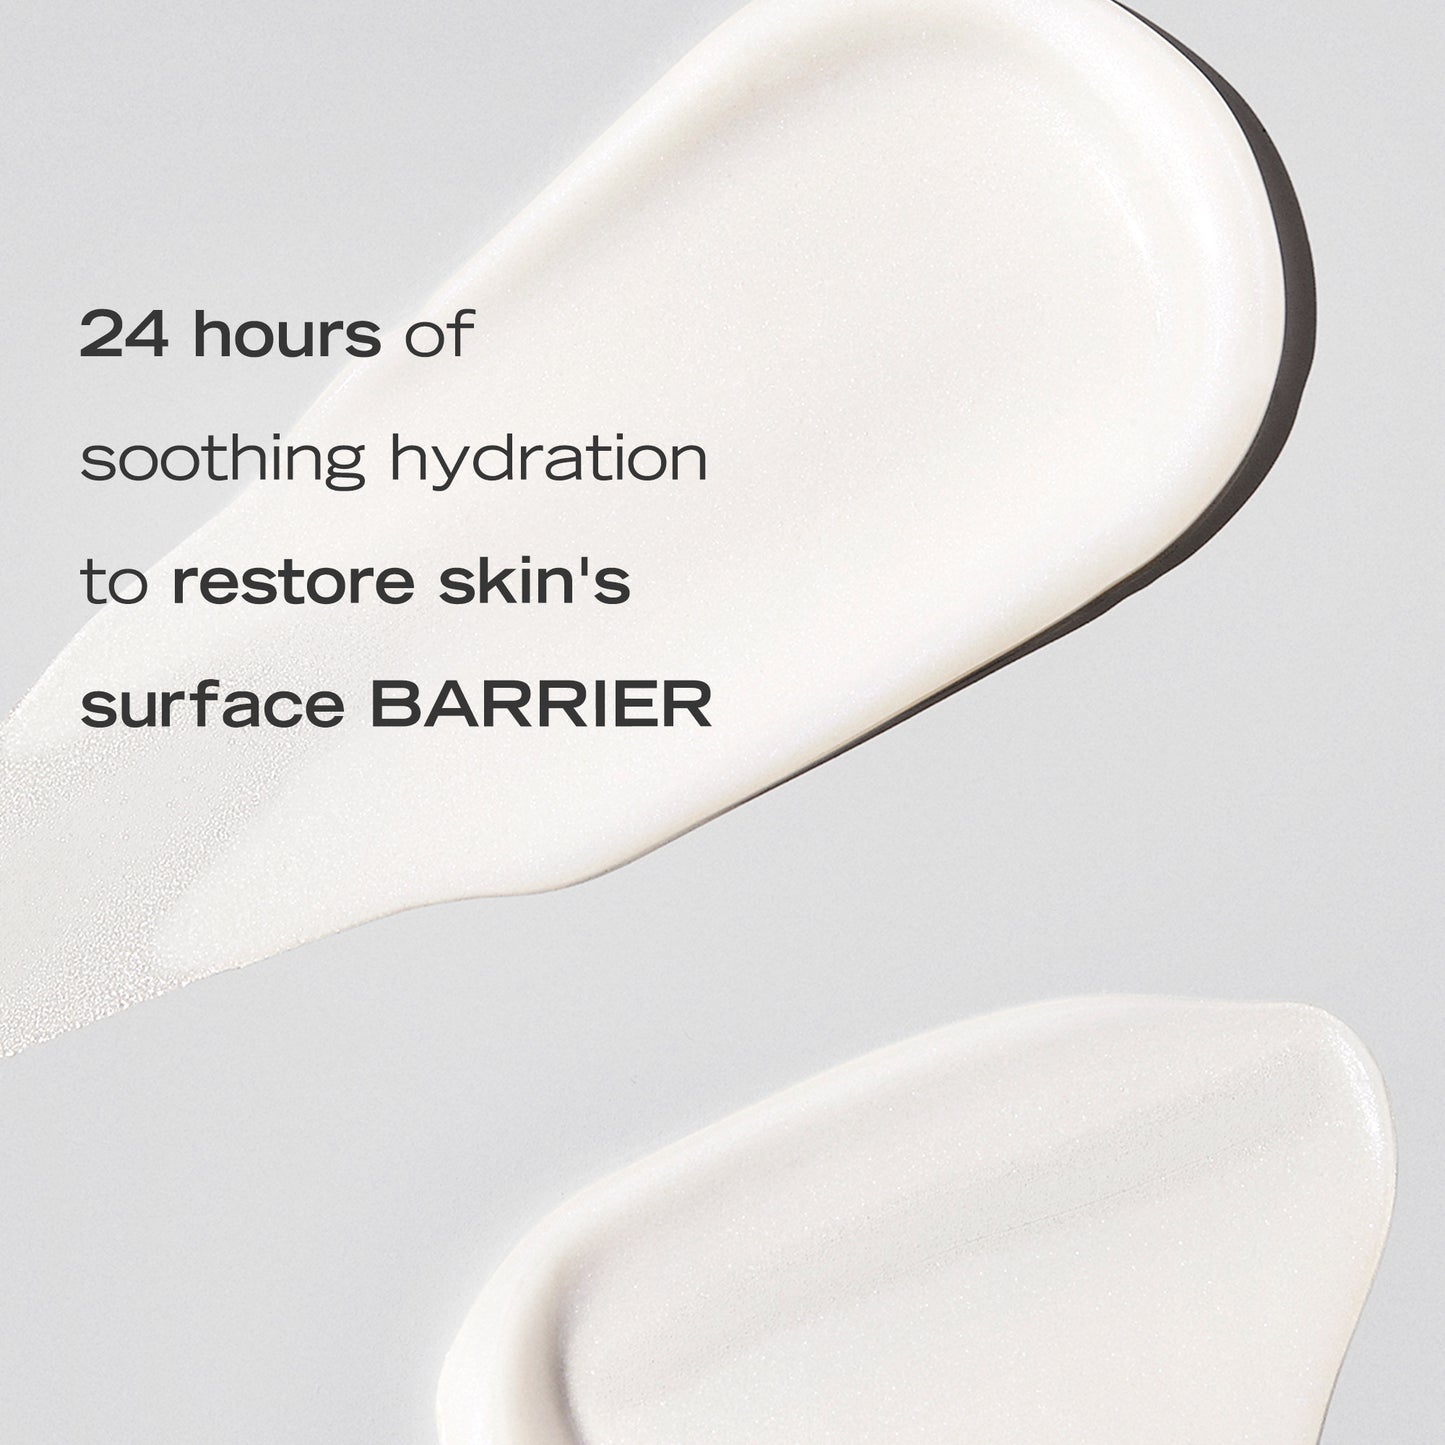 Consistency of Retinol Complex Serum. 24 hours of soothing hydration to restore skin's surface barrier.